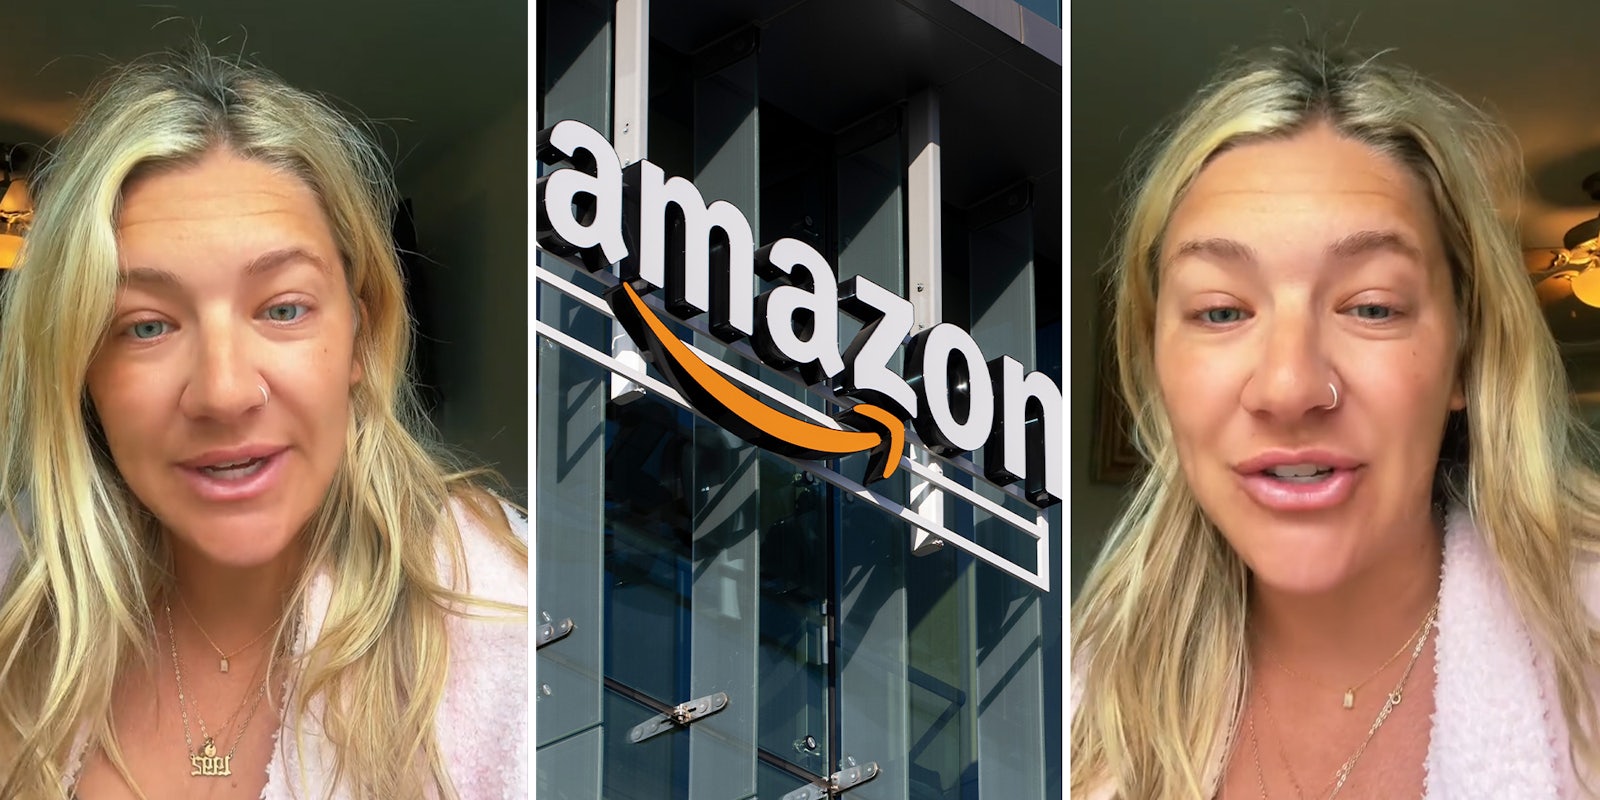 Amazon fails to deliver chairs, tells customer to ‘file a police report’